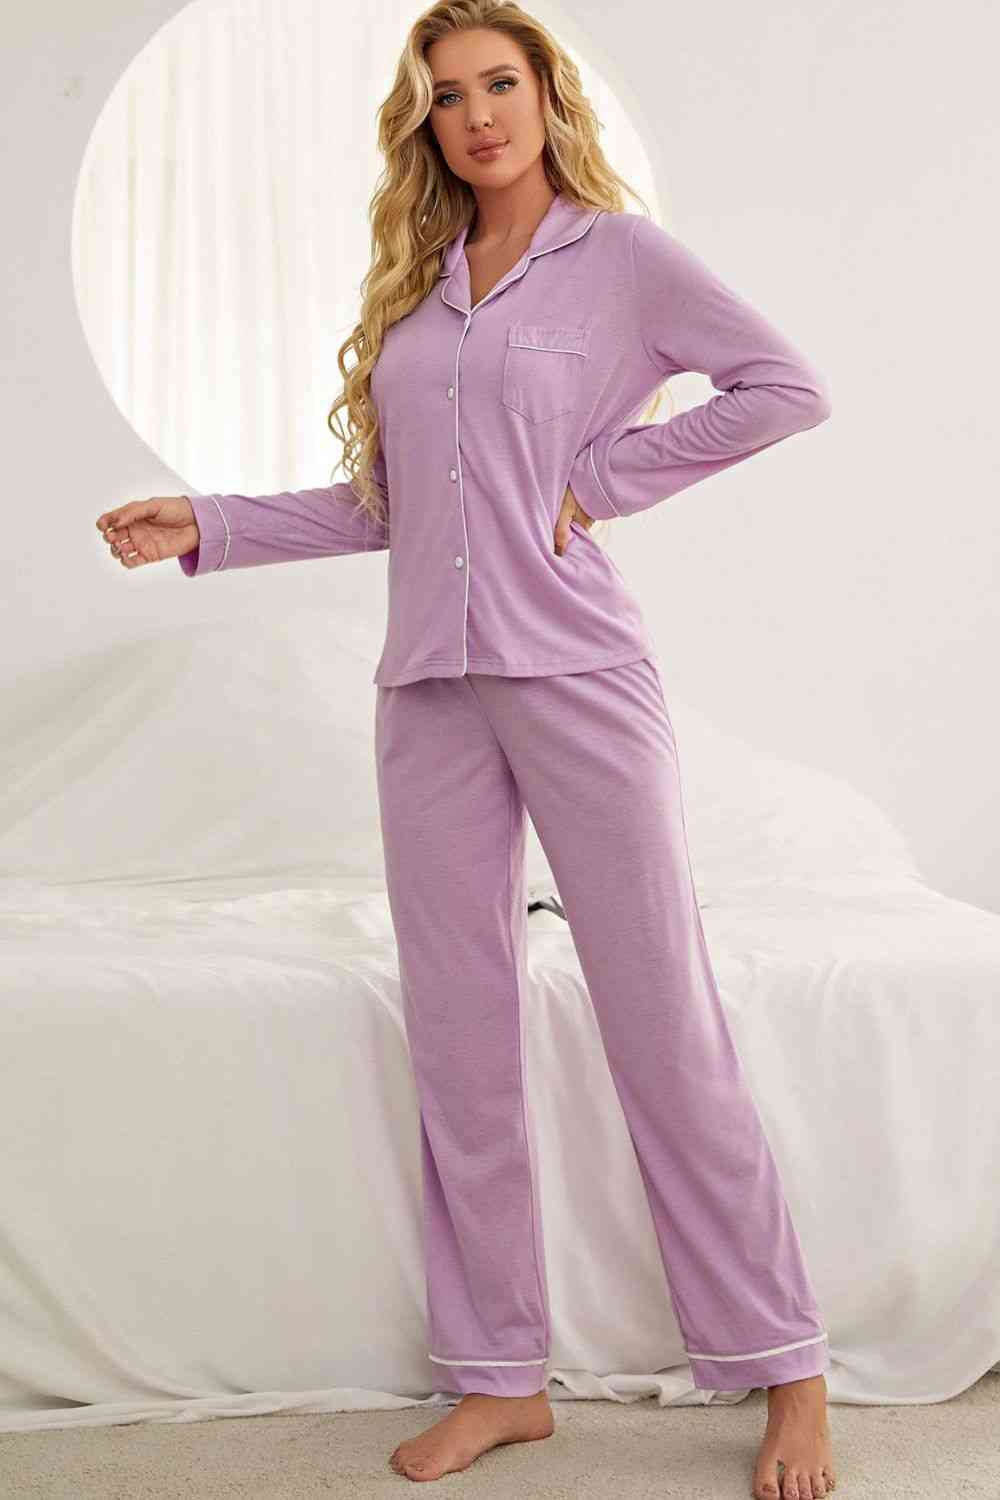 Contrast Piping Button Down Top and Pants Loungewear Set (2 Colors)